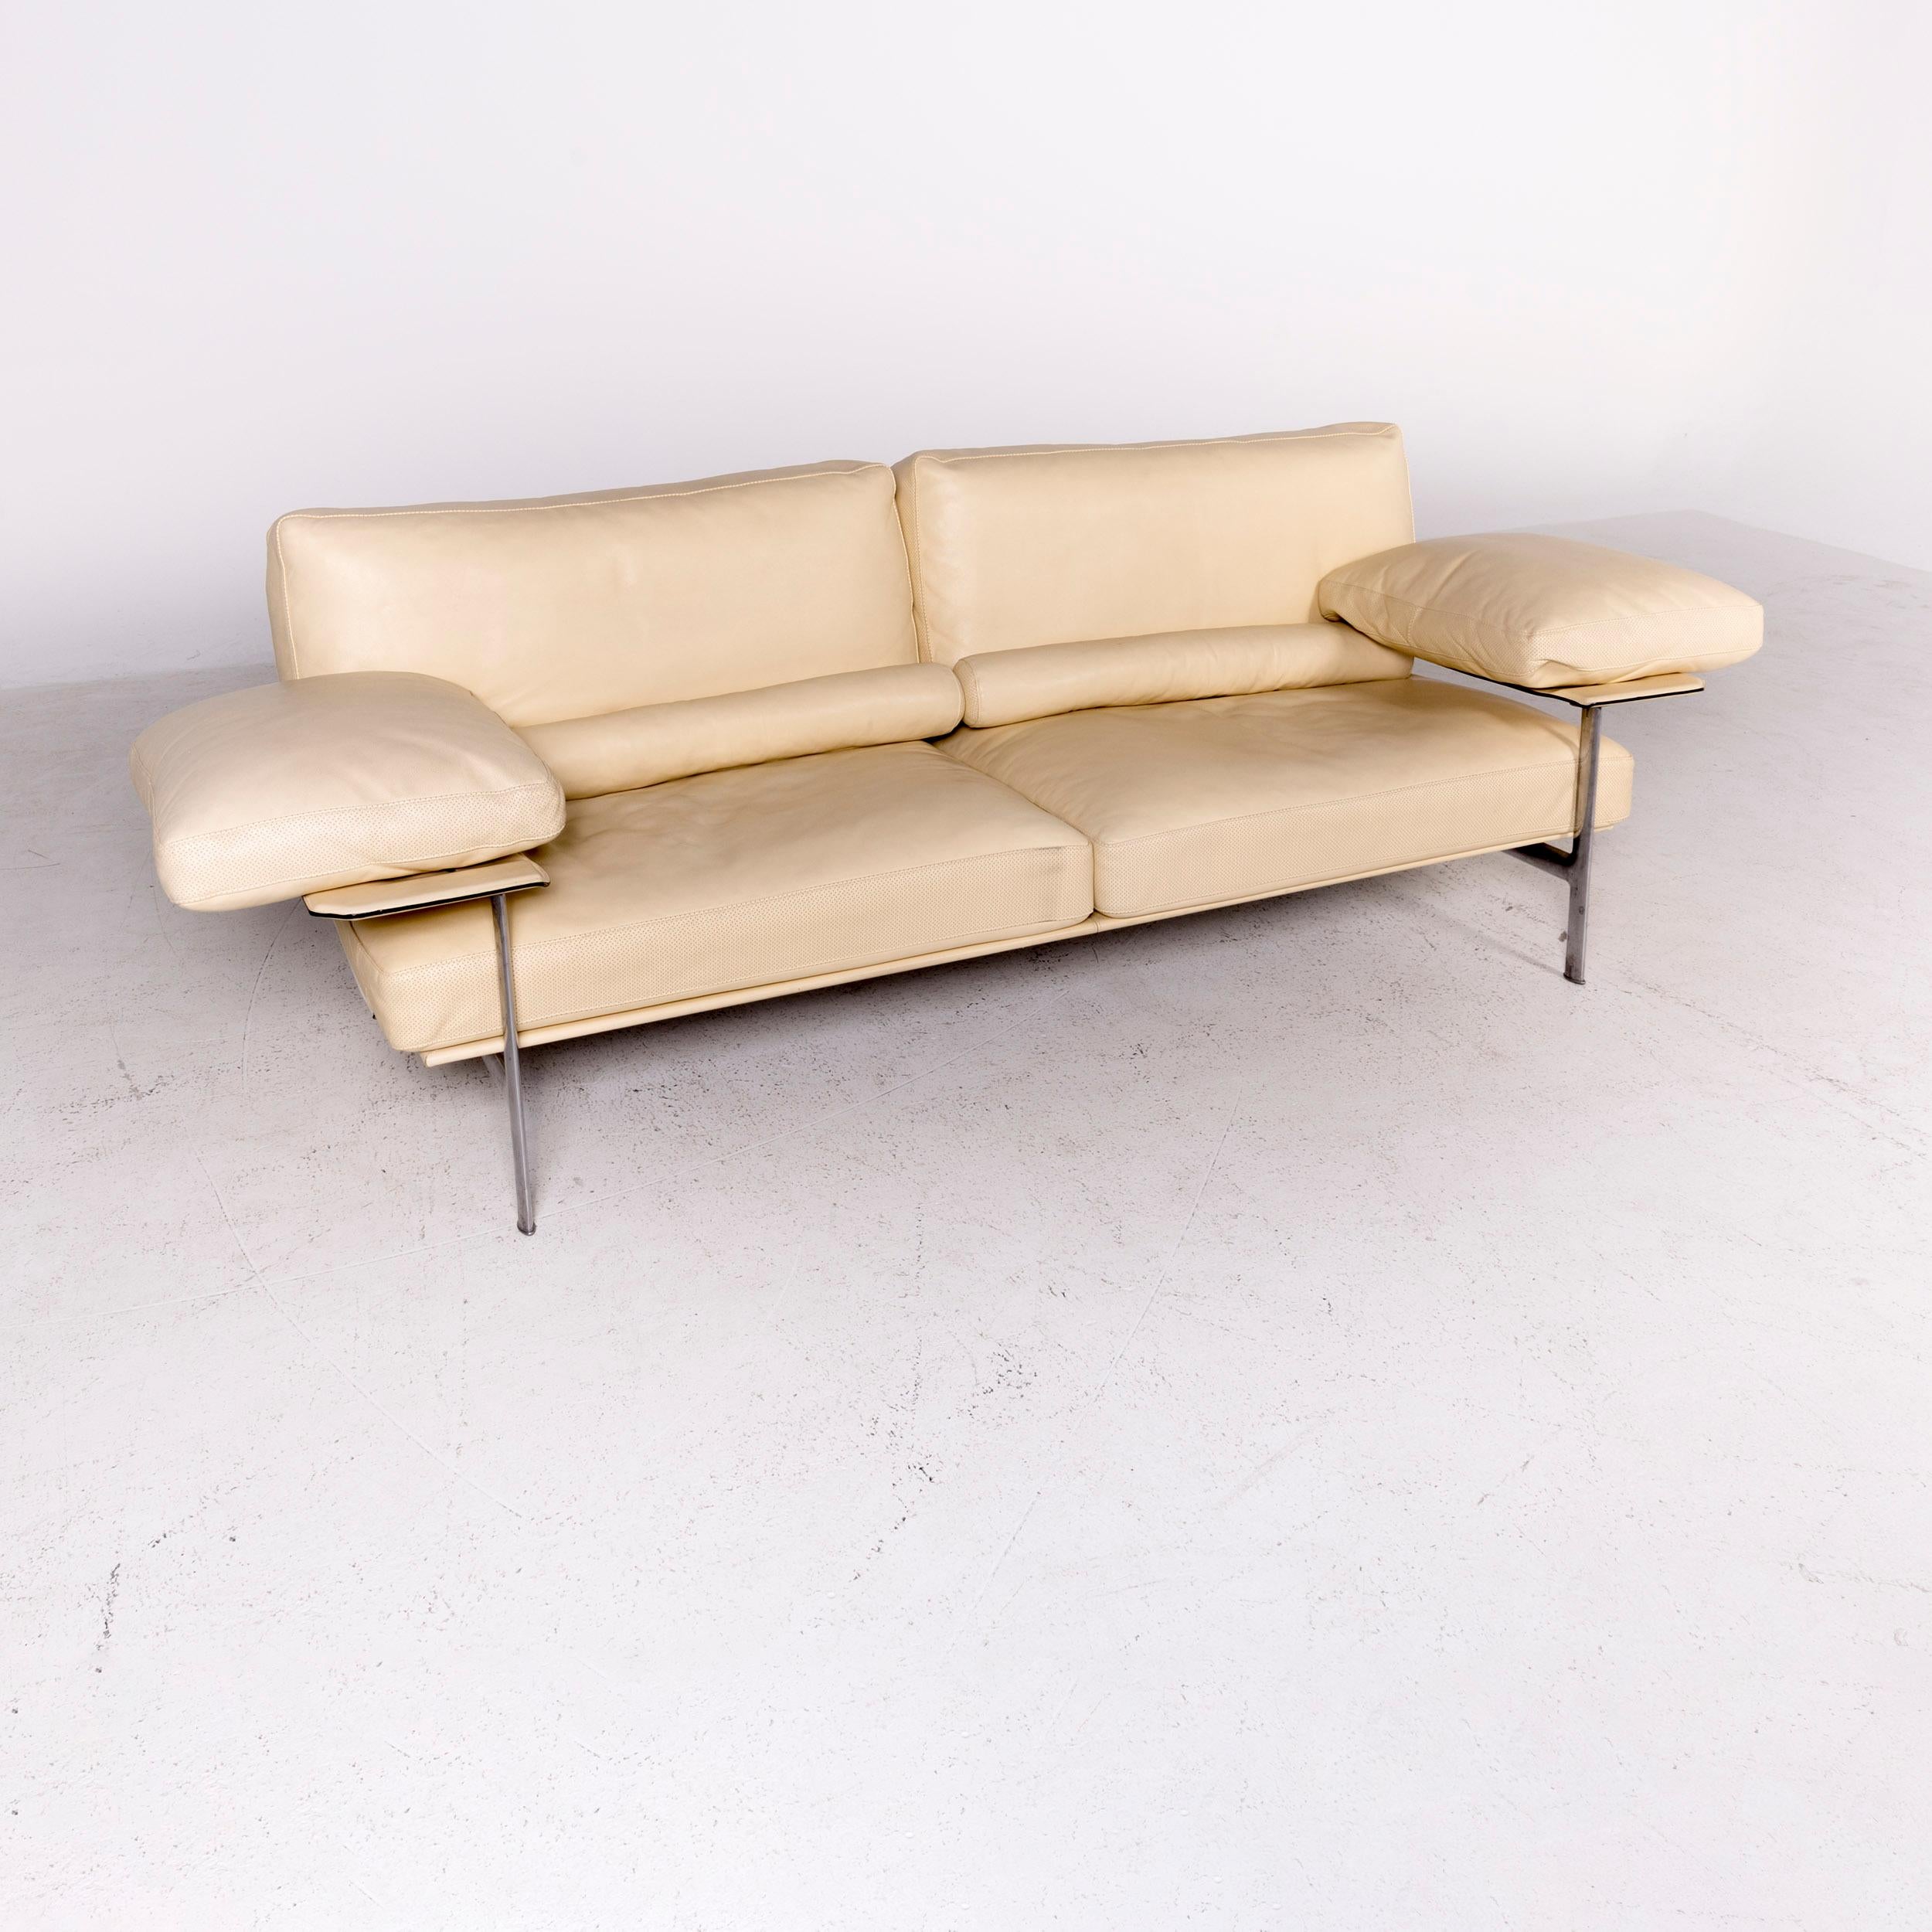 We bring to you a B & B Italia Diesis designer leather sofa beige real leather three-seat couch.

Product measurements in centimeters:

Depth 93
Width 243
Height 79
Seat-height 42
Rest-height 64
Seat-depth 56
Seat-width 149
Back-height